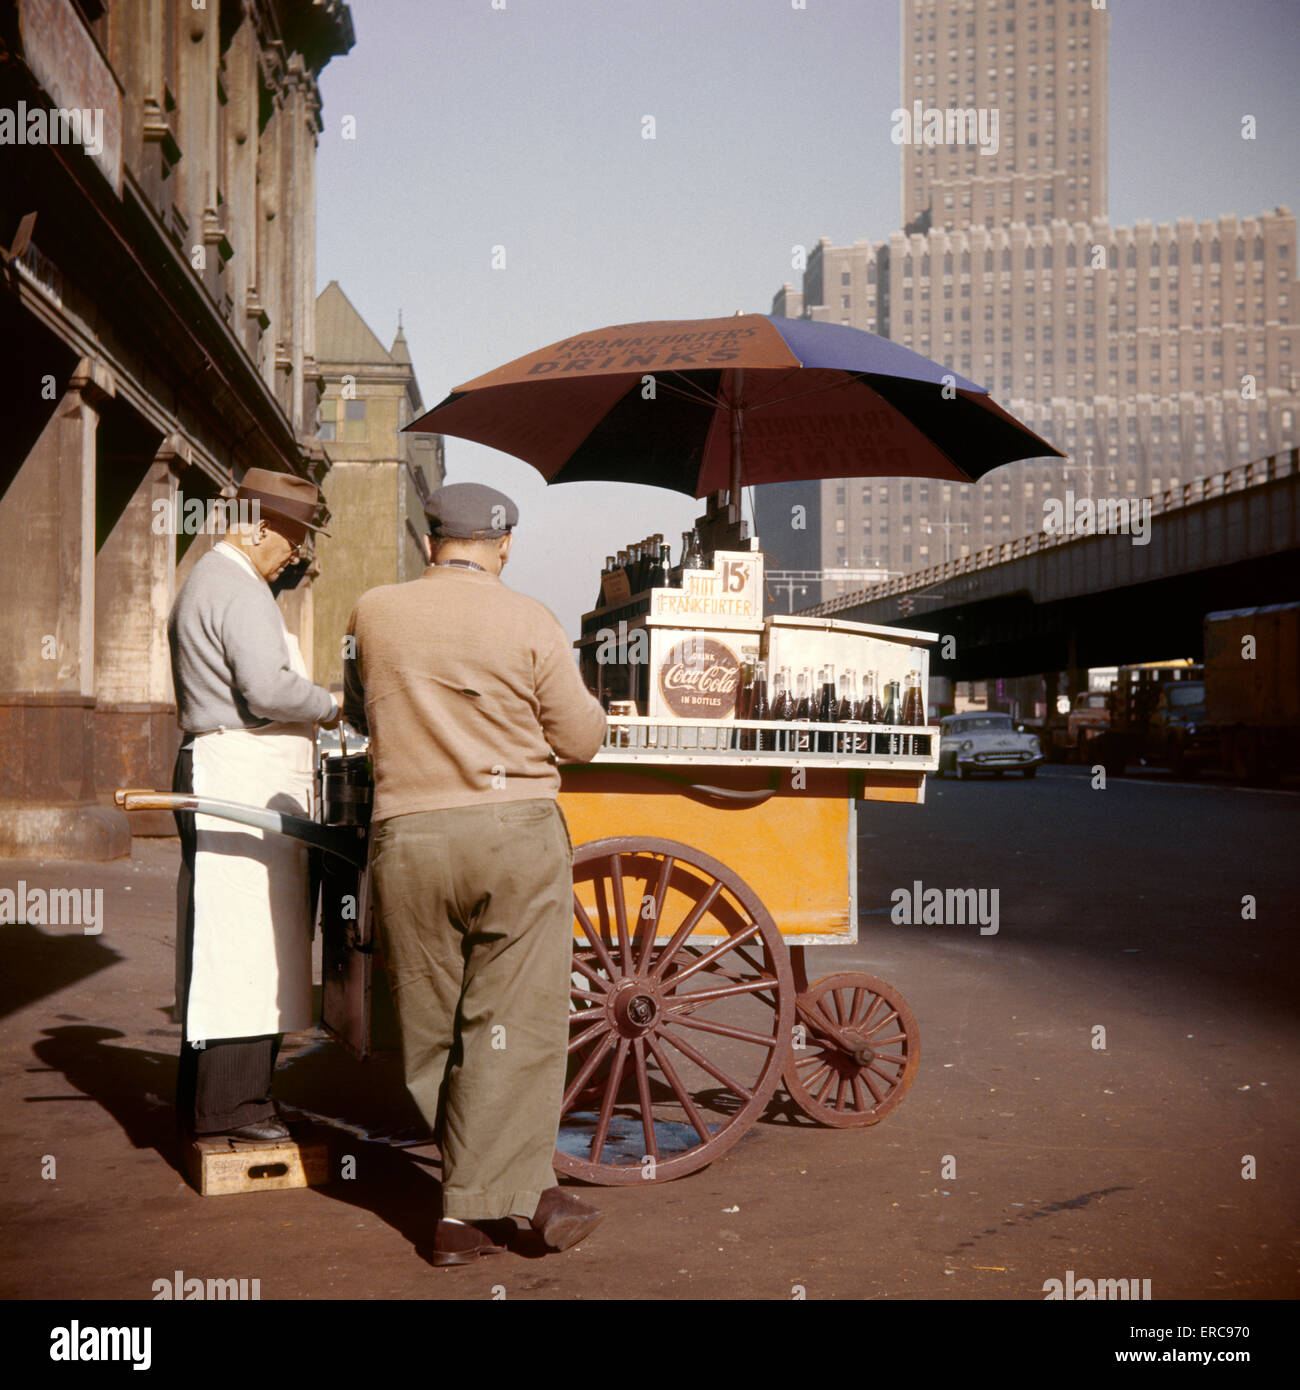 1950s MAN HOT DOG VENDOR PUSHCART WITH UMBRELLA SELLING COKES FOR 15 CENTS WEST STREET DOWNTOWN MANHATTAN NEW YORK USA Stock Photo